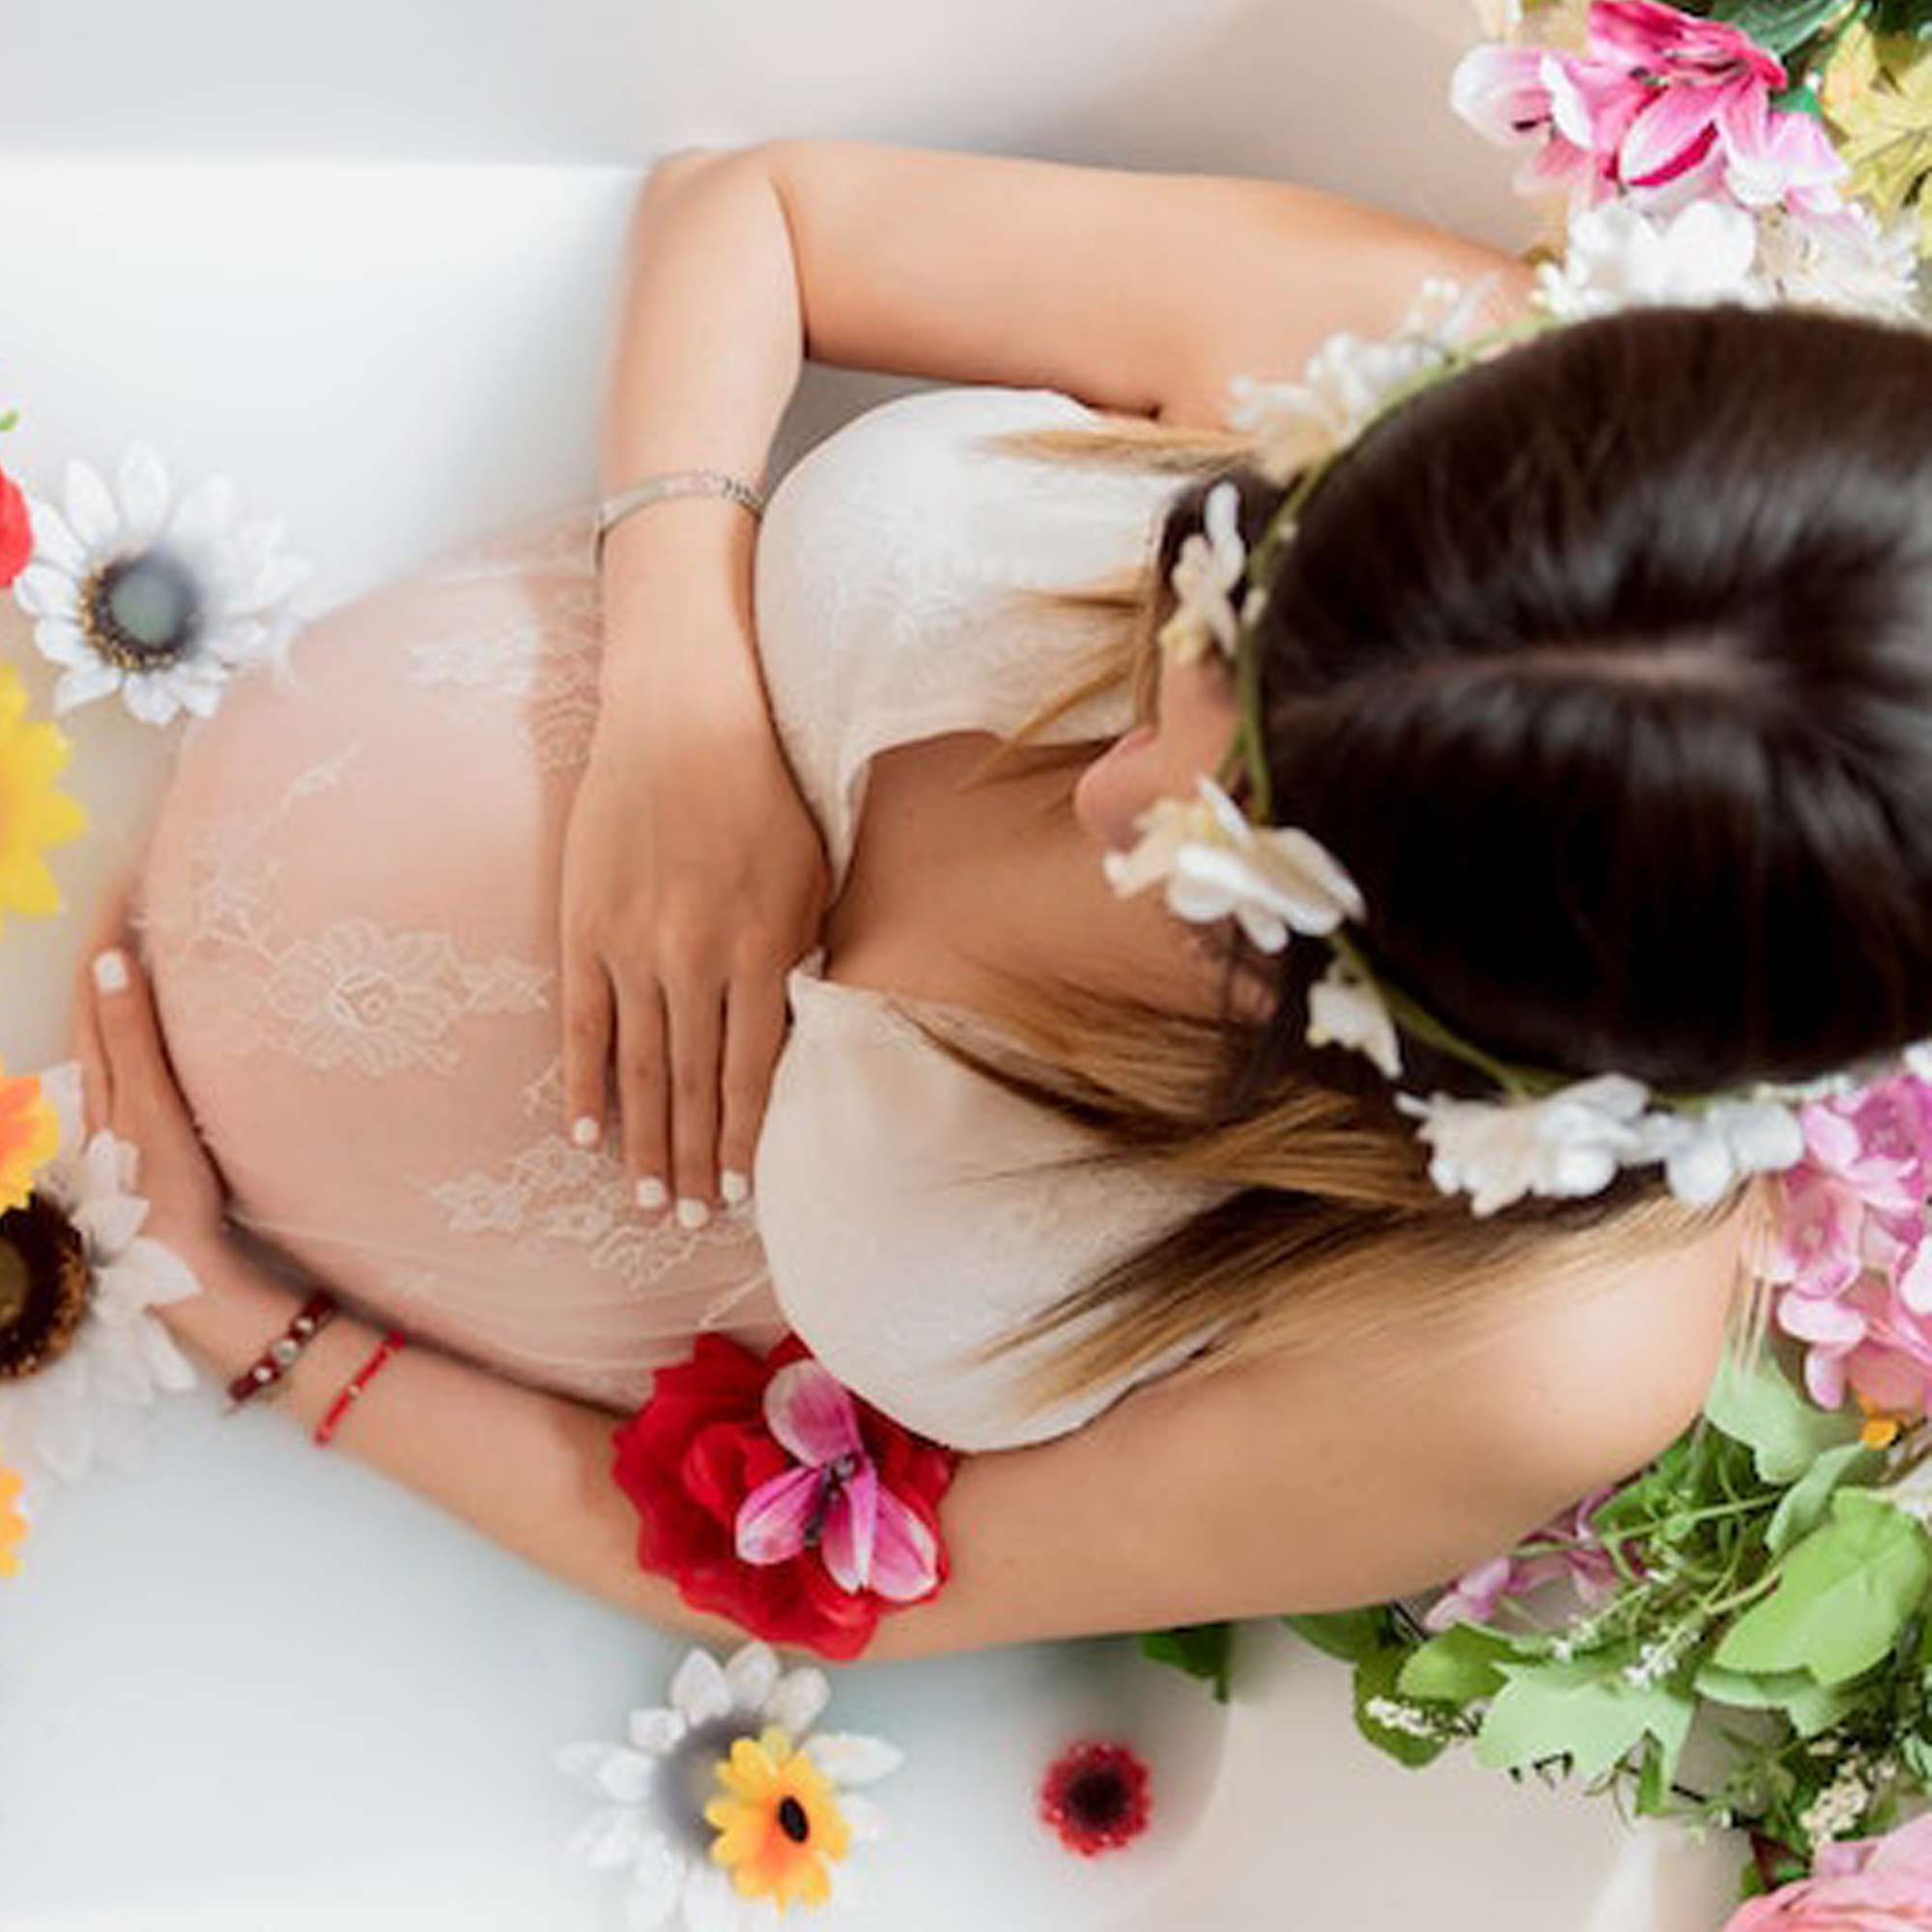 A pregnant woman lying in a milk bath with flowers portraying skincare during pregnancy.